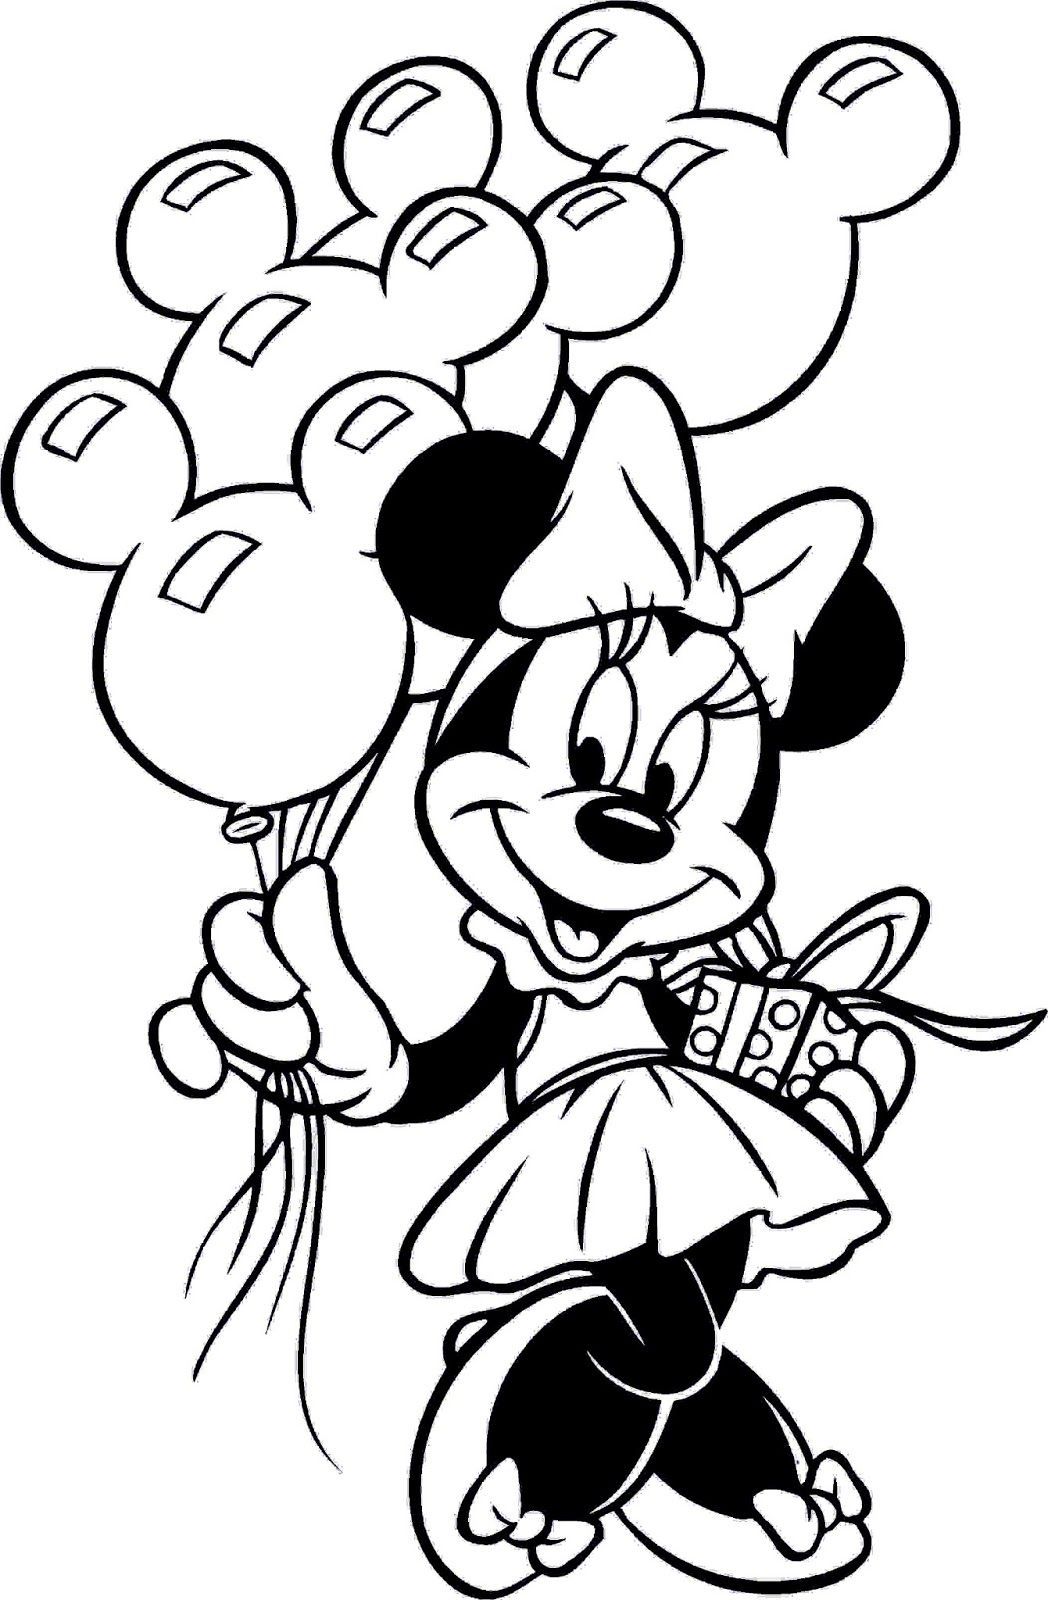 minnie-mouse-with-balloons-coloring-pages-minnie-mouse-coloring-pages-coloring-pages-for